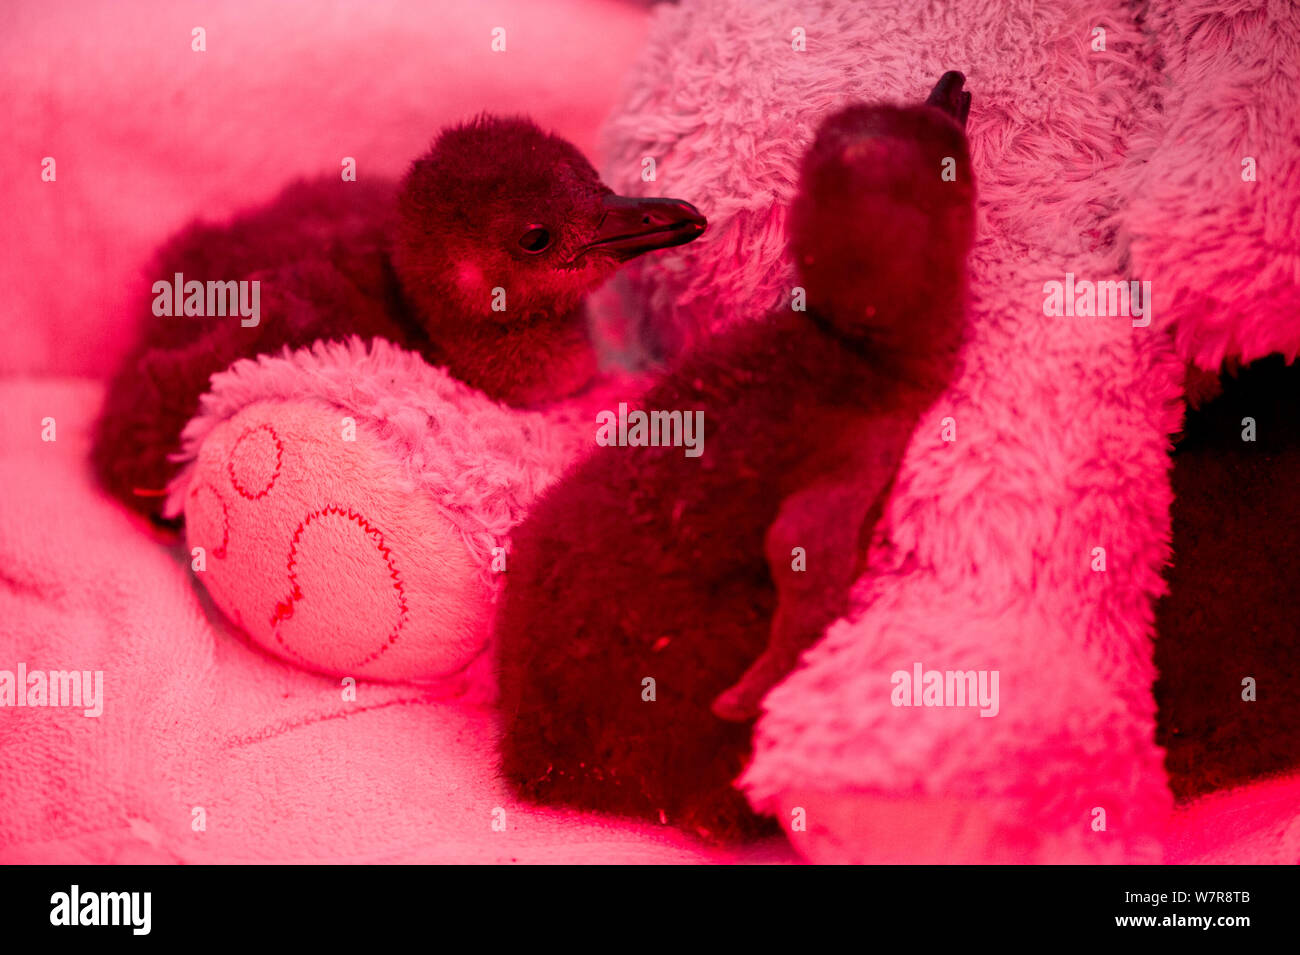 African penguin (Spheniscus demersus) chicks in brooder box with infra red heat lamp and teddy bear, part of Chick Bolstering Project, Southern African Foundation for the Conservation of Coastal Birds (SANCCOB), South Africa Stock Photo